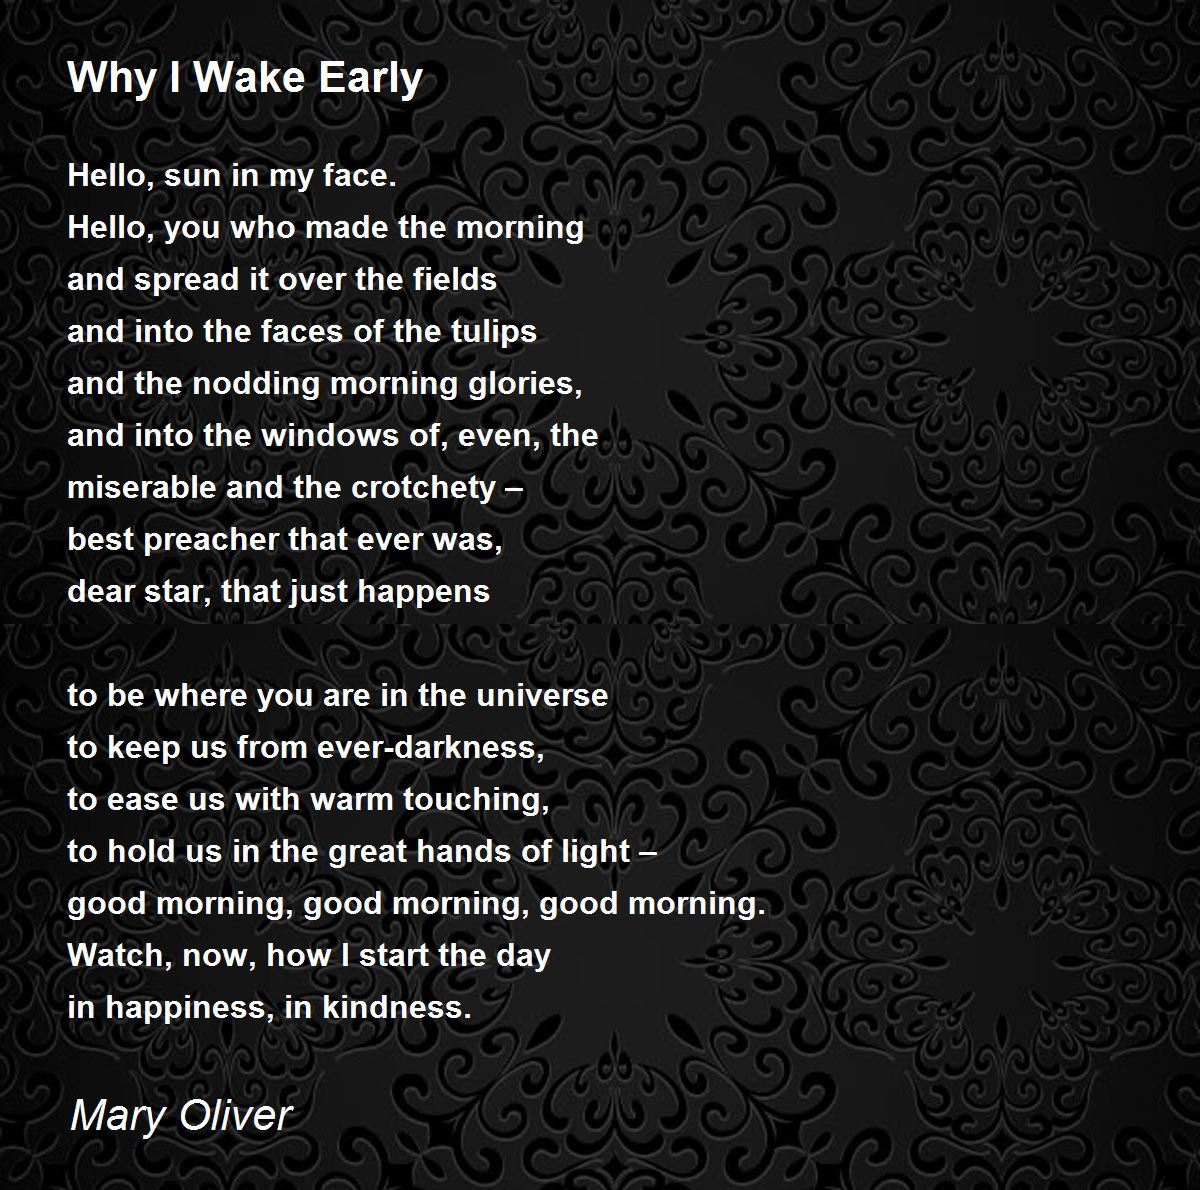 Why I Wake Early - Why I Wake Early Poem by Mary Oliver